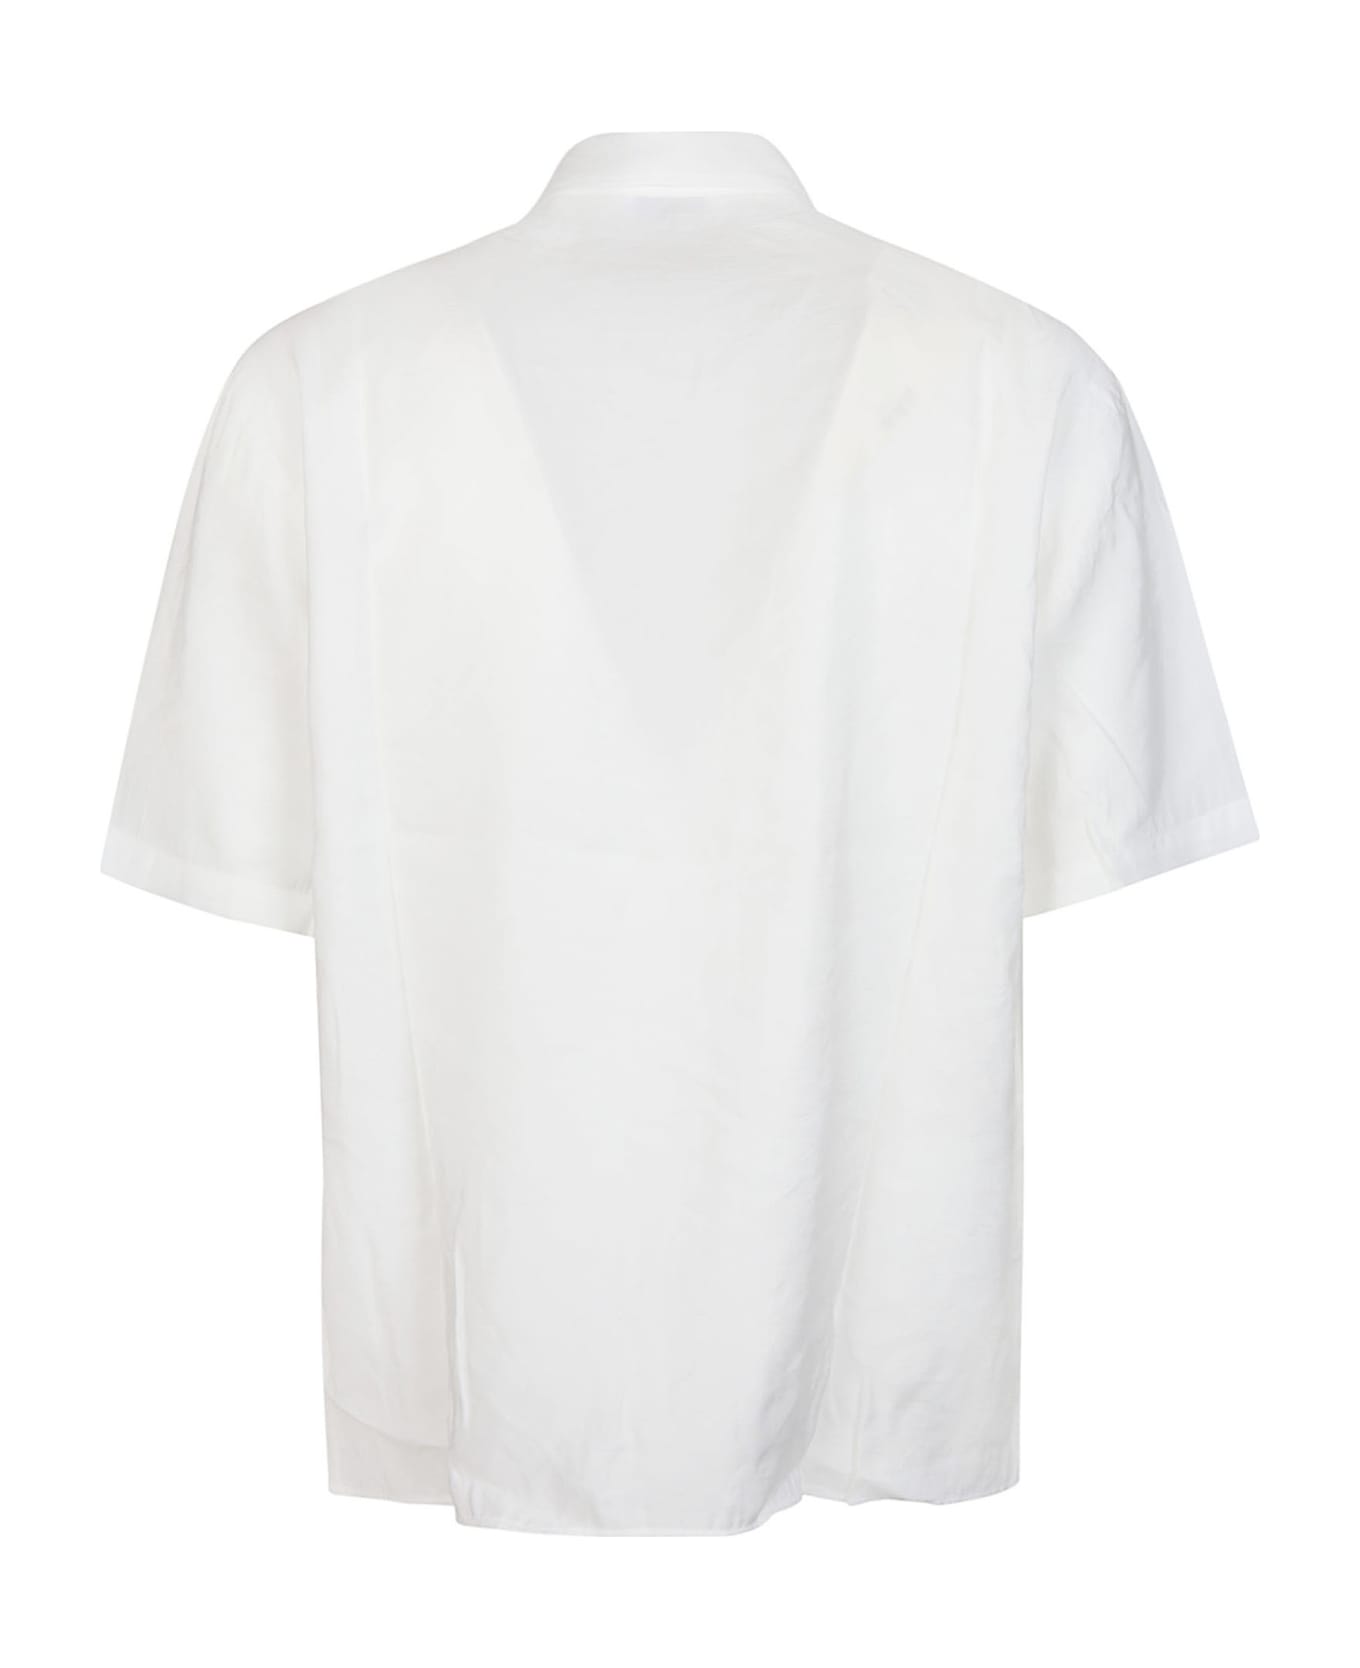 Family First Milano Short Sleeve Cupro Shirt - WHITE シャツ